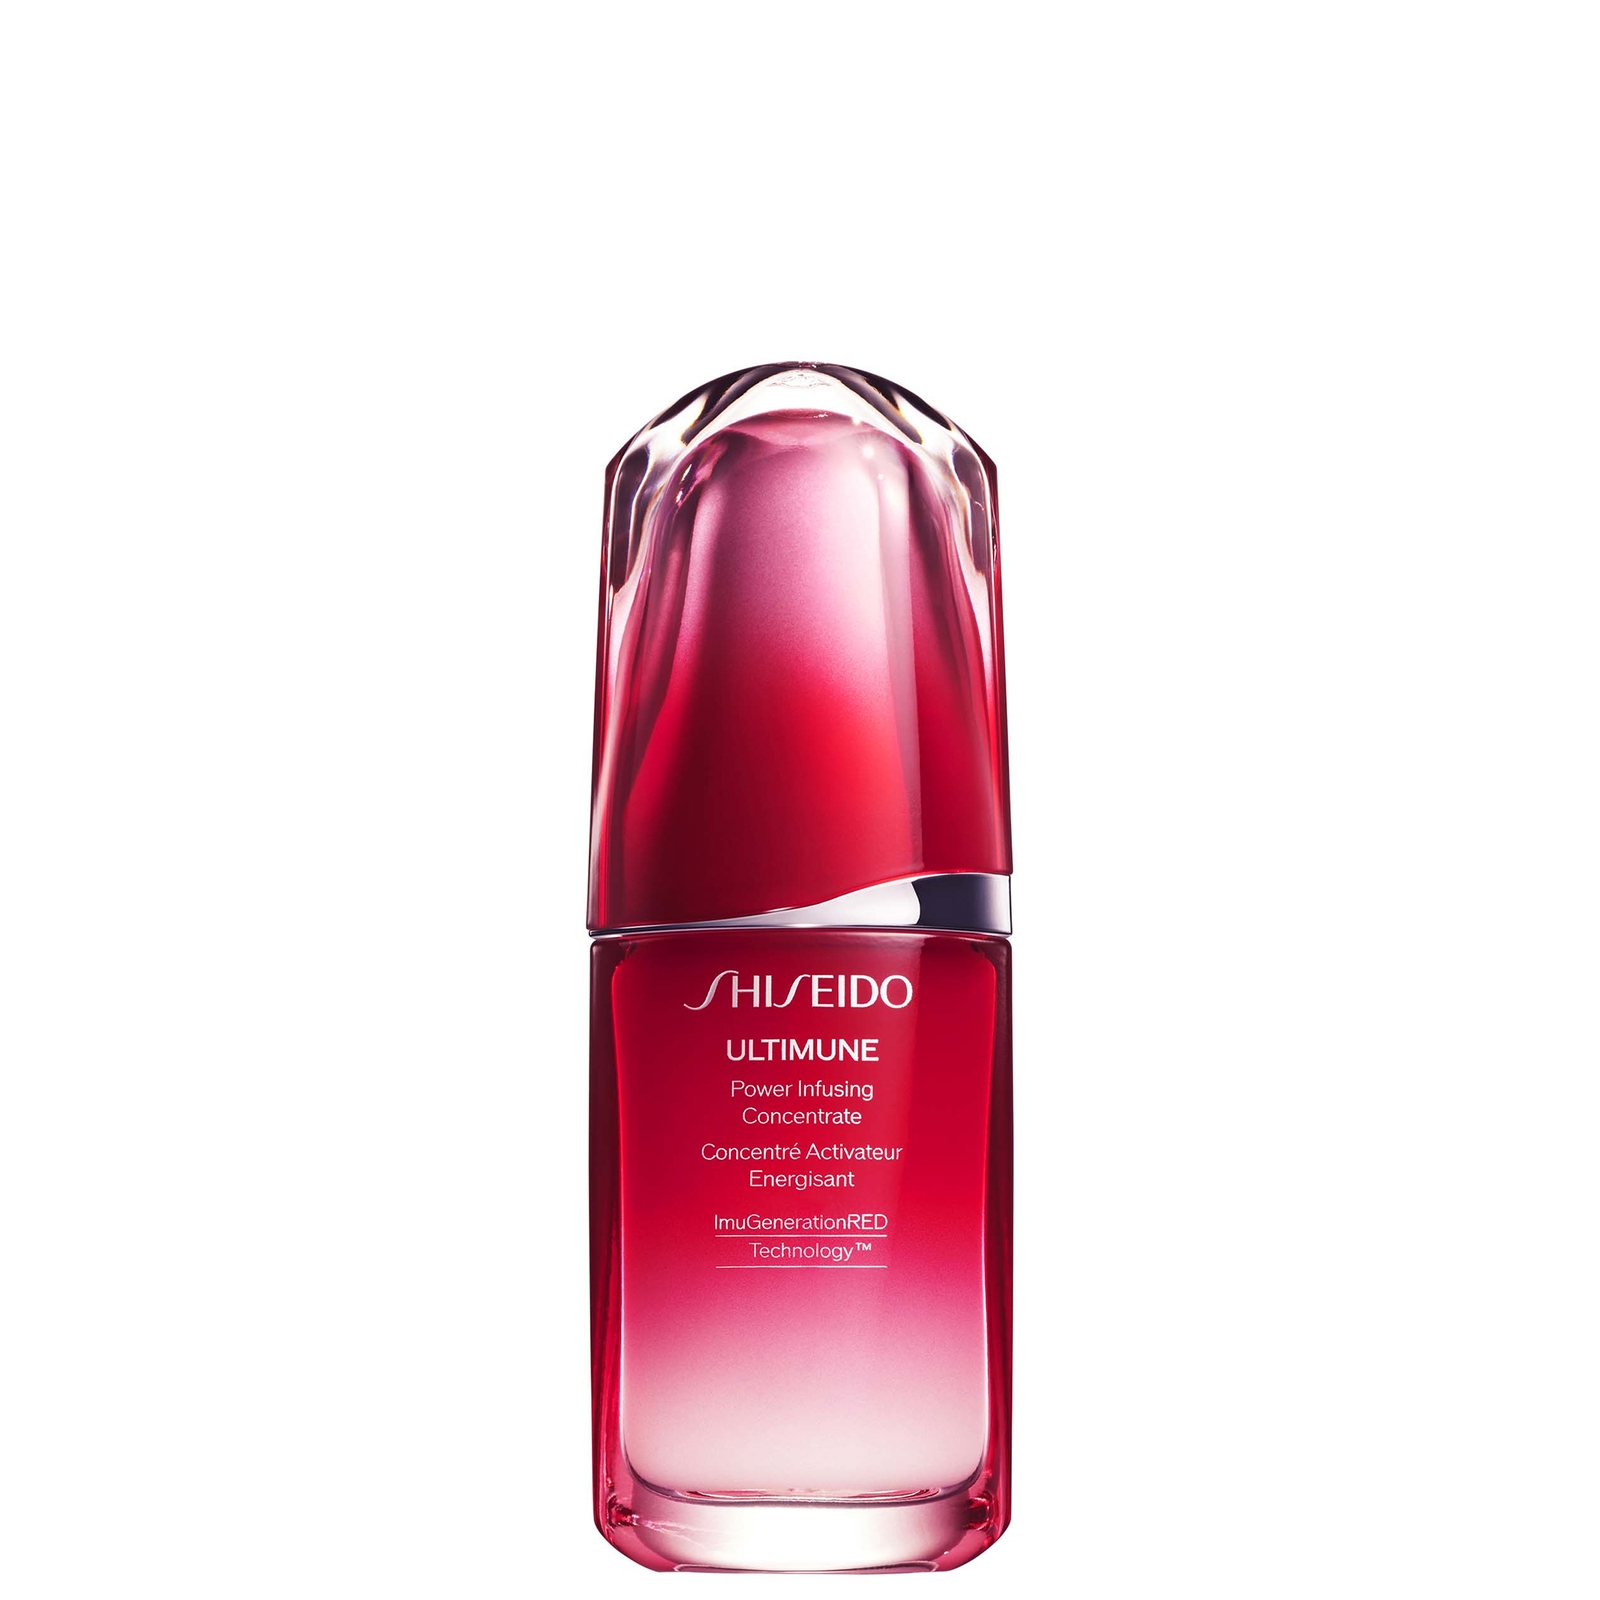 Photos - Cream / Lotion Shiseido Ultimune Power Infusing Concentrate  - 50ml (Various Sizes)